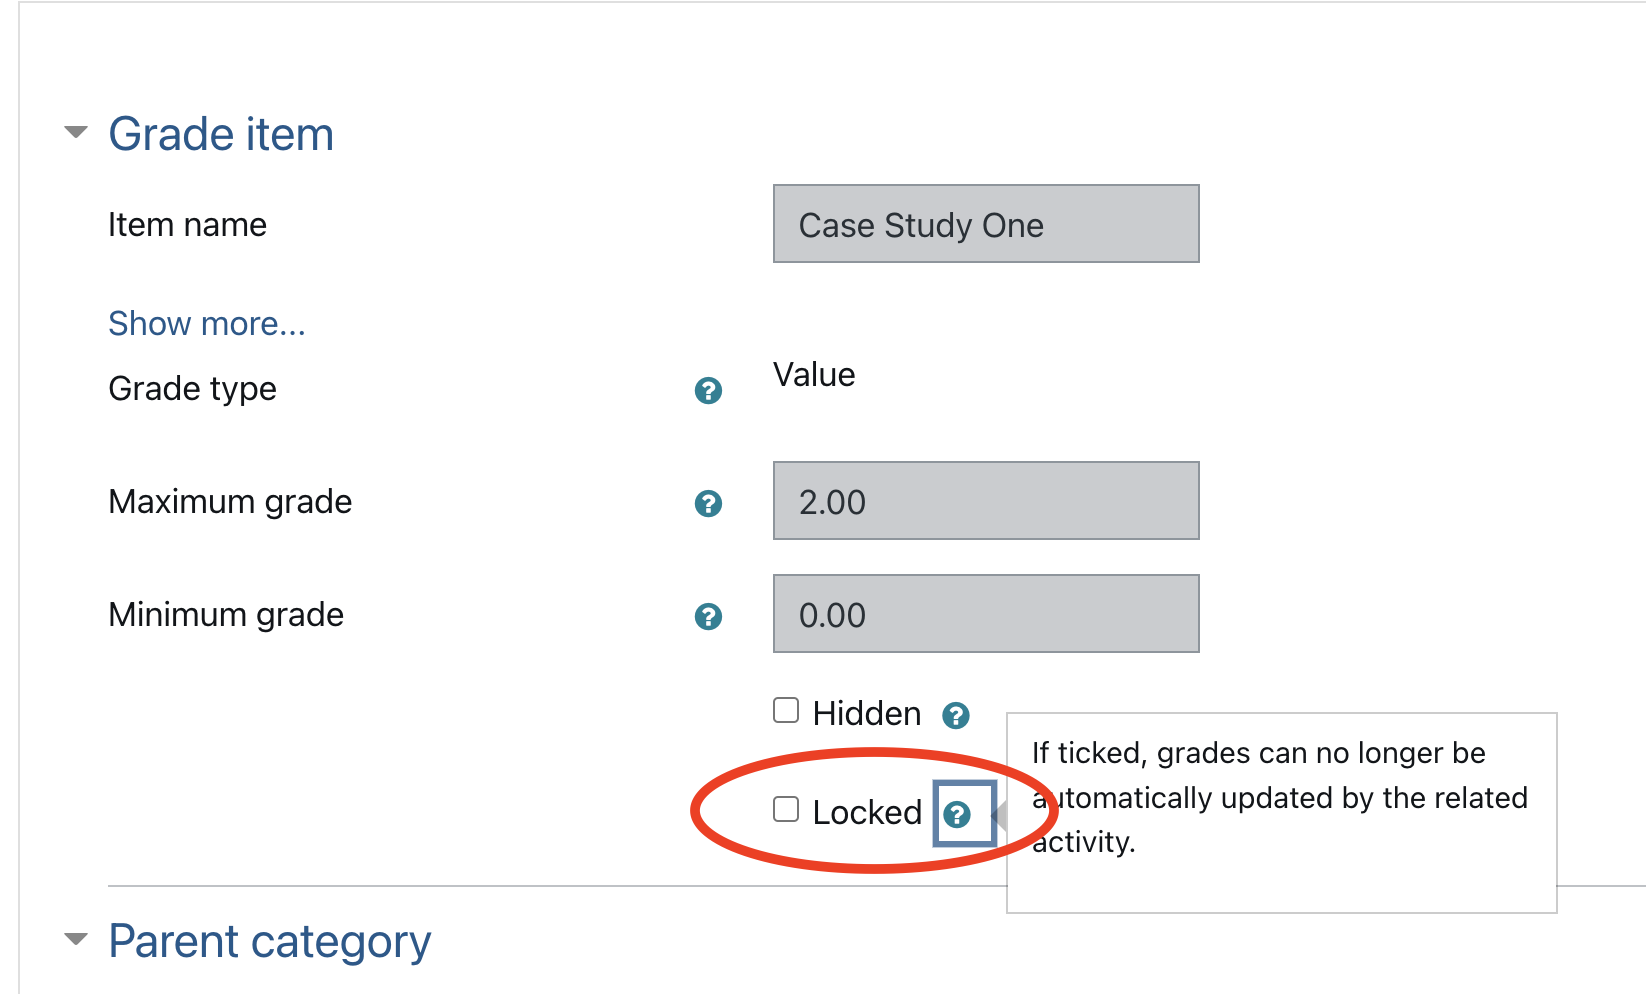 Grade item settings screen. A checkbox is circled that changes the "Locked" status of the grade item.